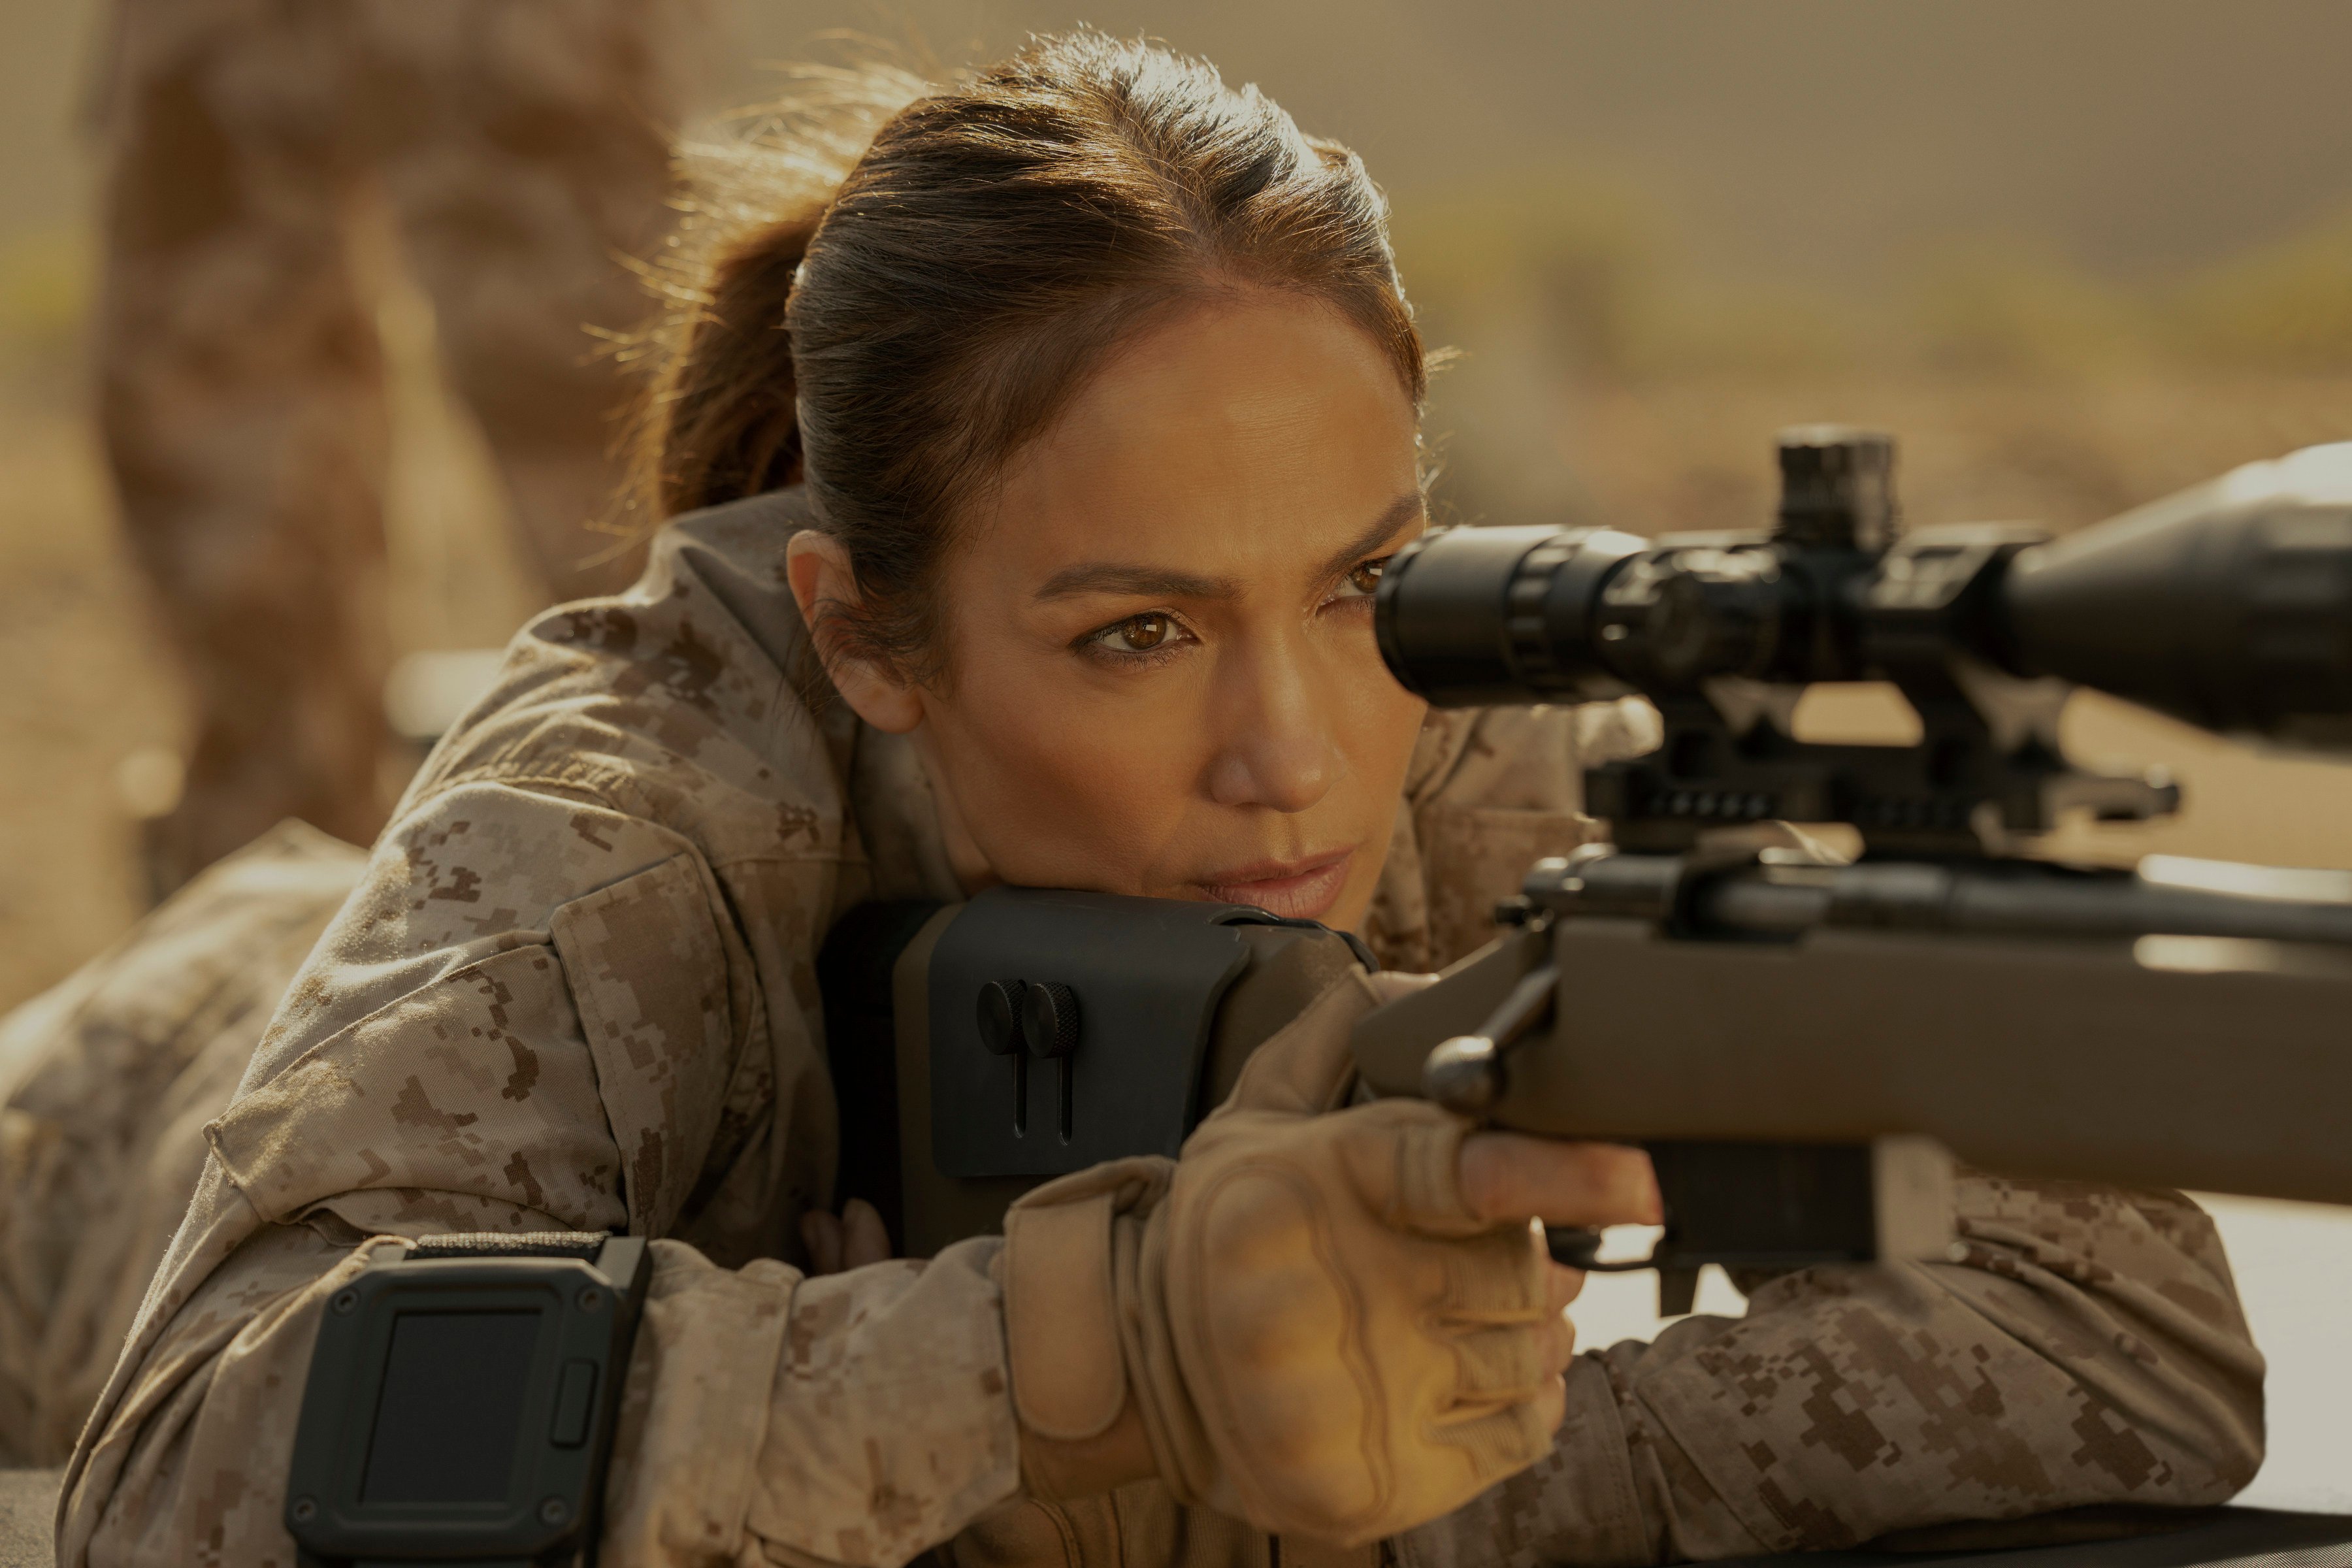 Jennifer Lopez as The Mother in a still from “The Mother”. Photo: Ana Carballosa/Netflix